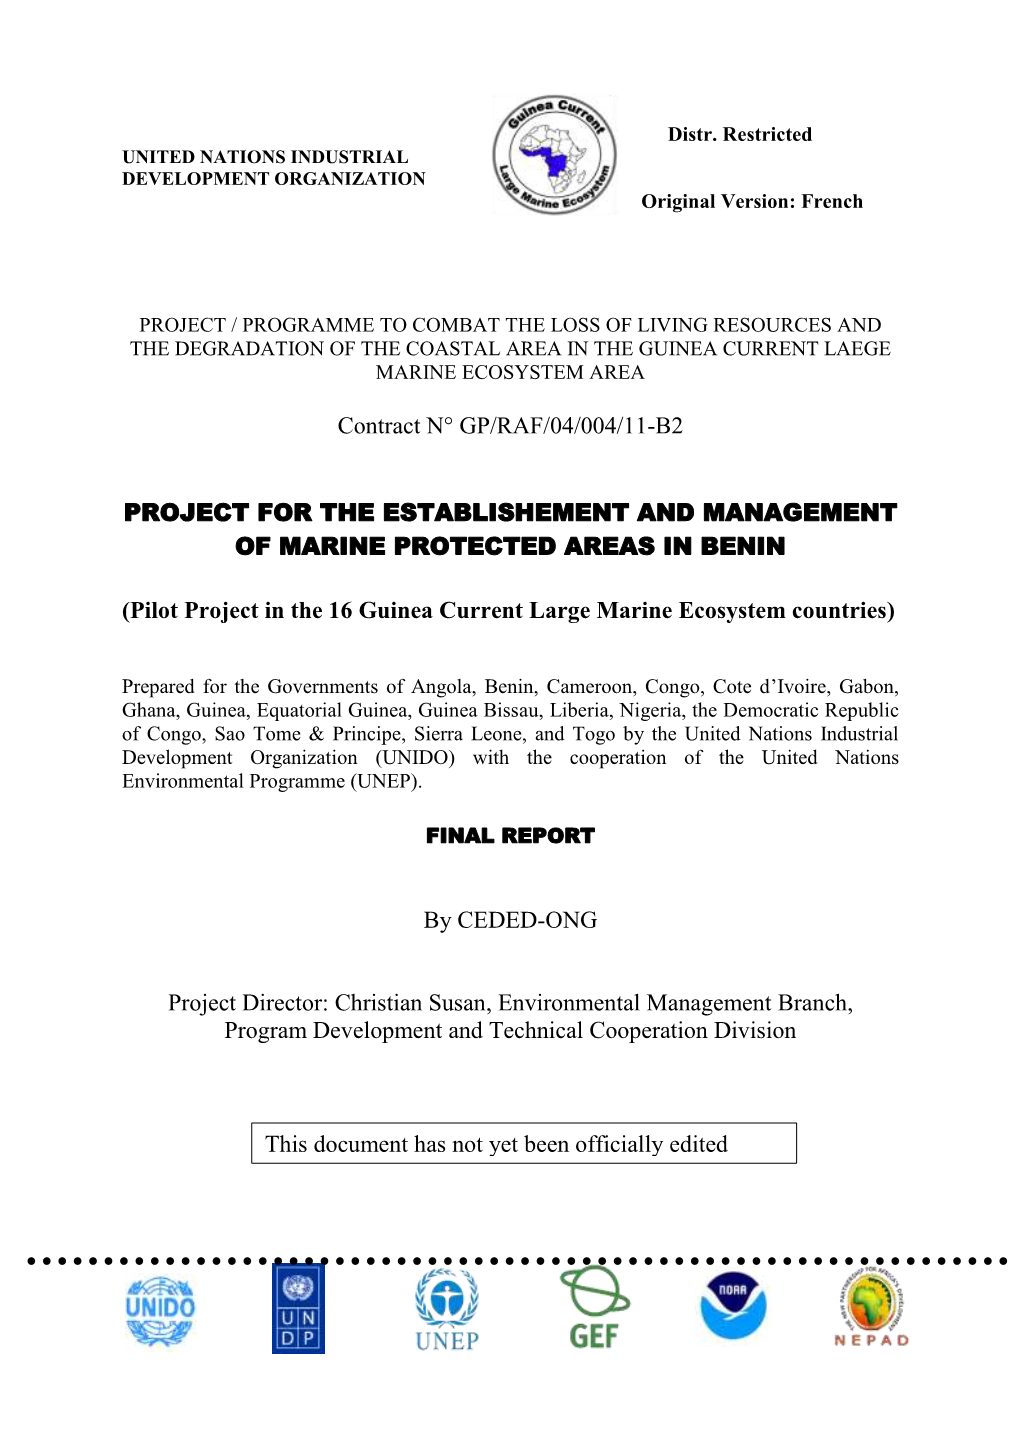 Project for the Establishment and Management of Marine Protected